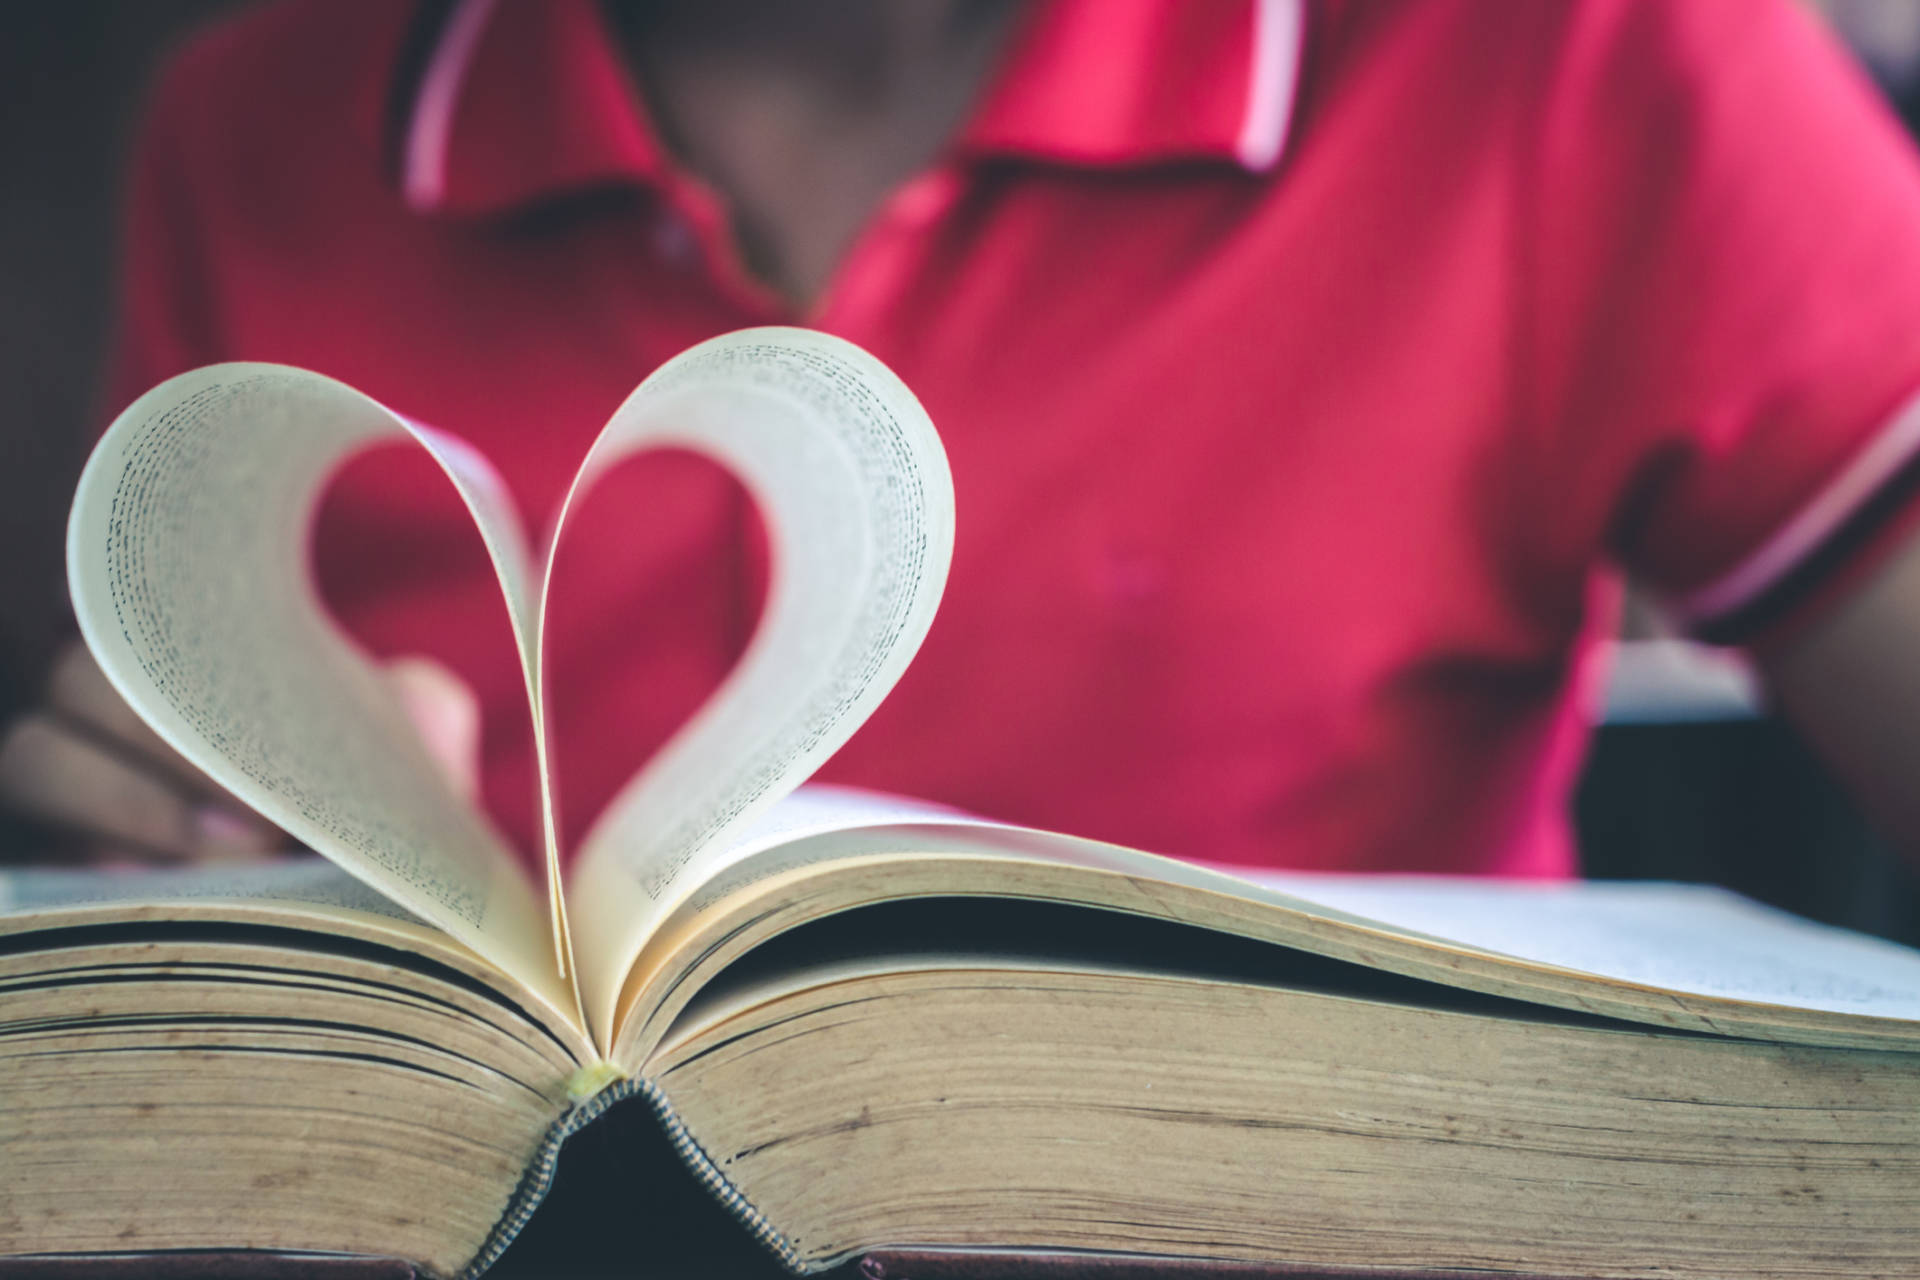 How to develop a love of reading in teens